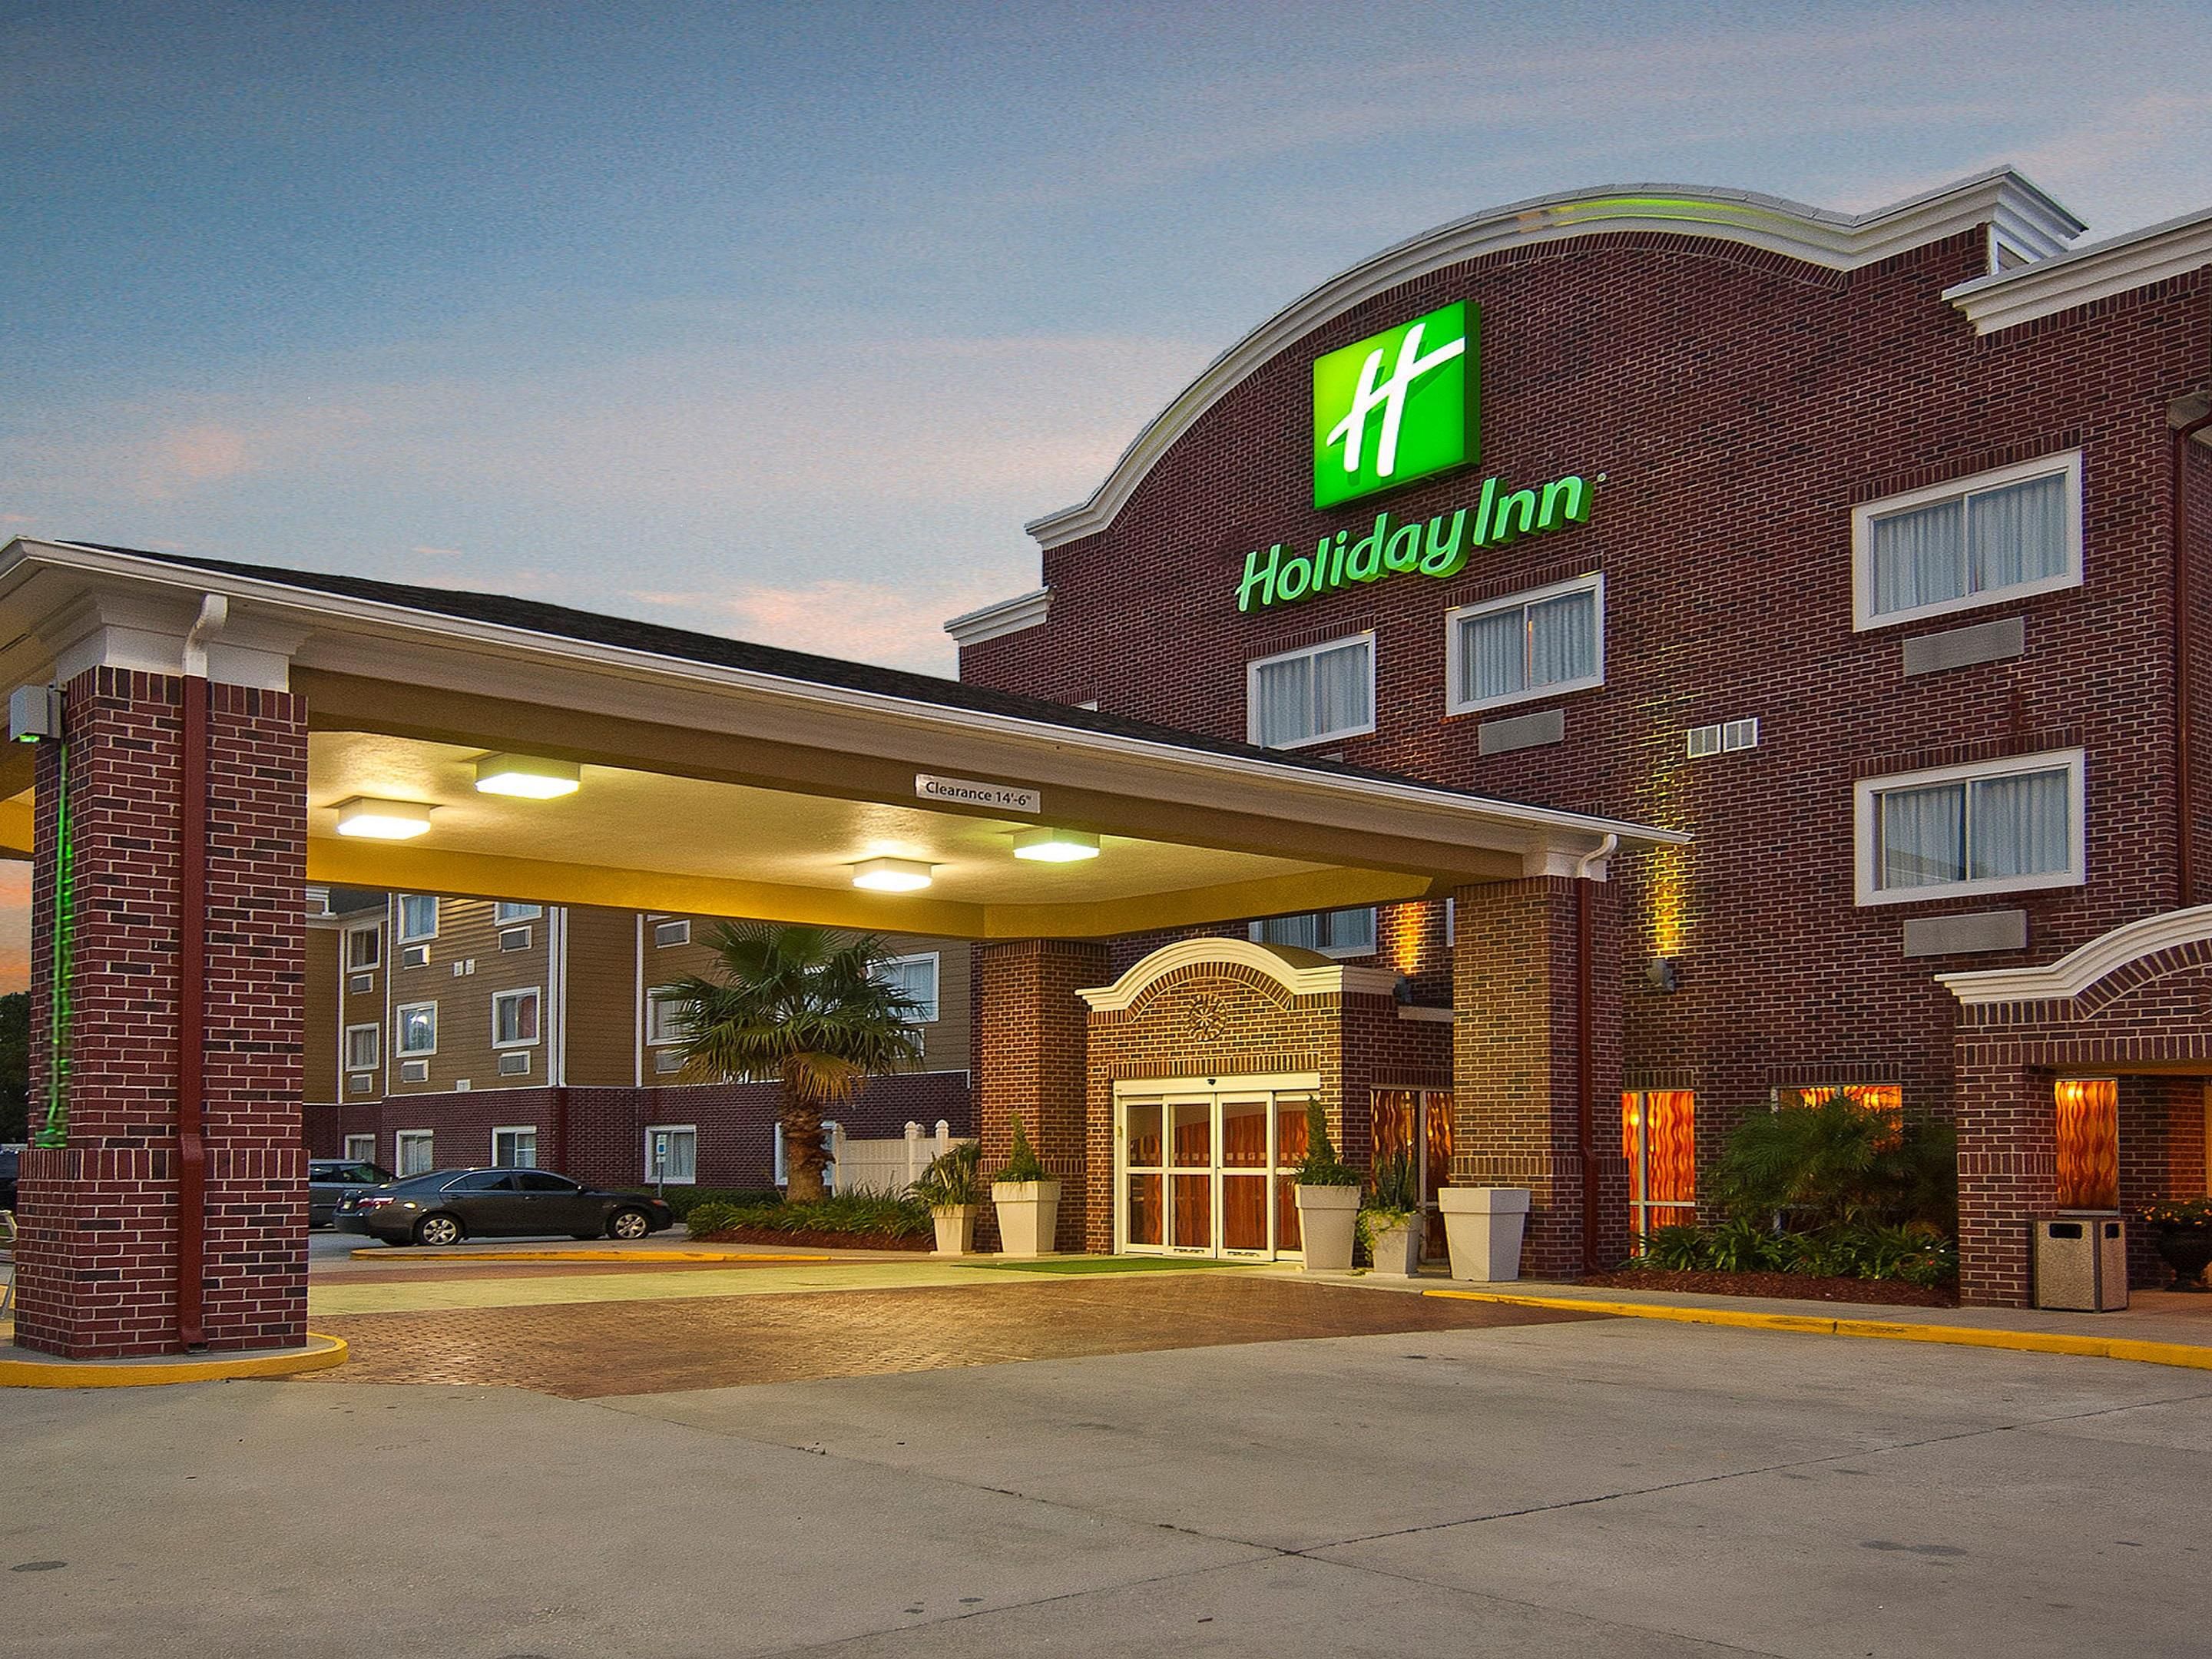 Holiday Inn Hotel And Suites Slidell 3554136171 4x3